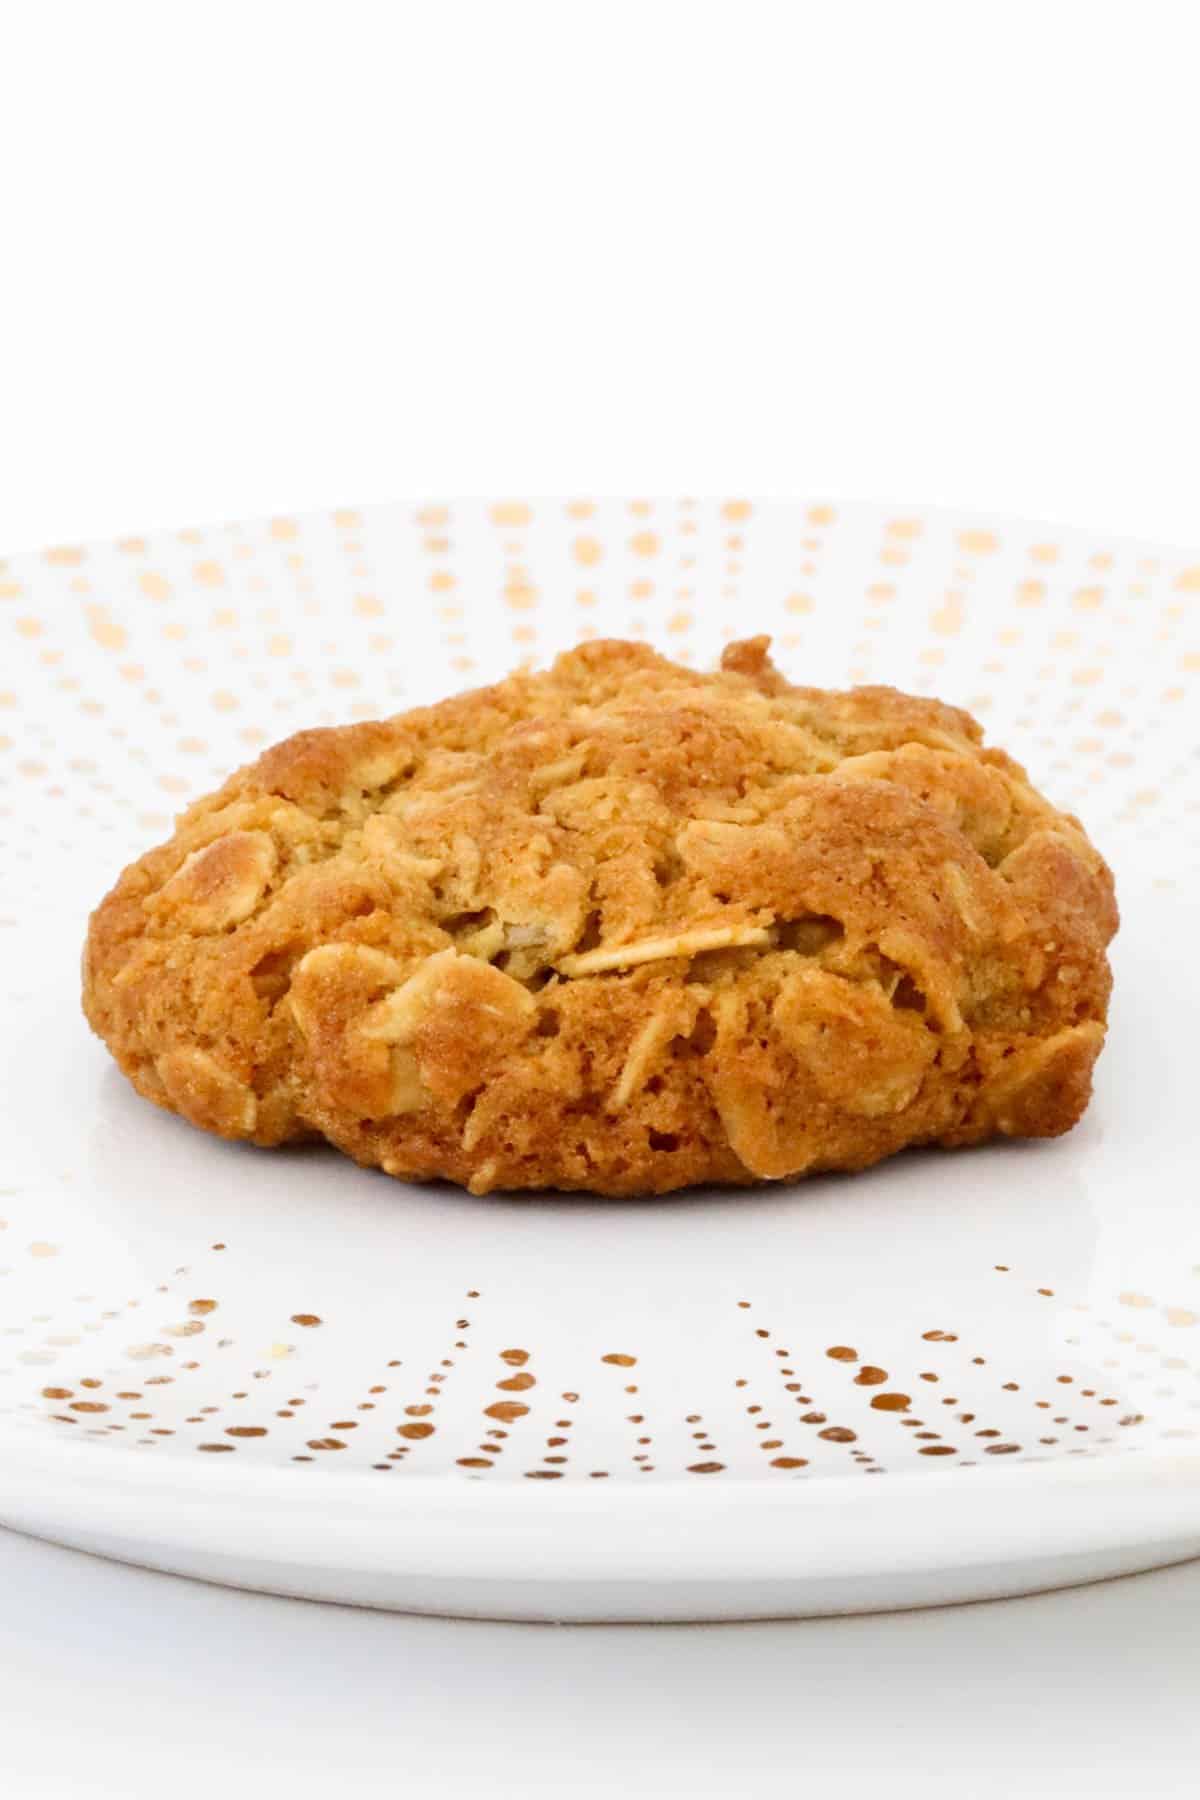 A golden oat biscuit on a white plate.